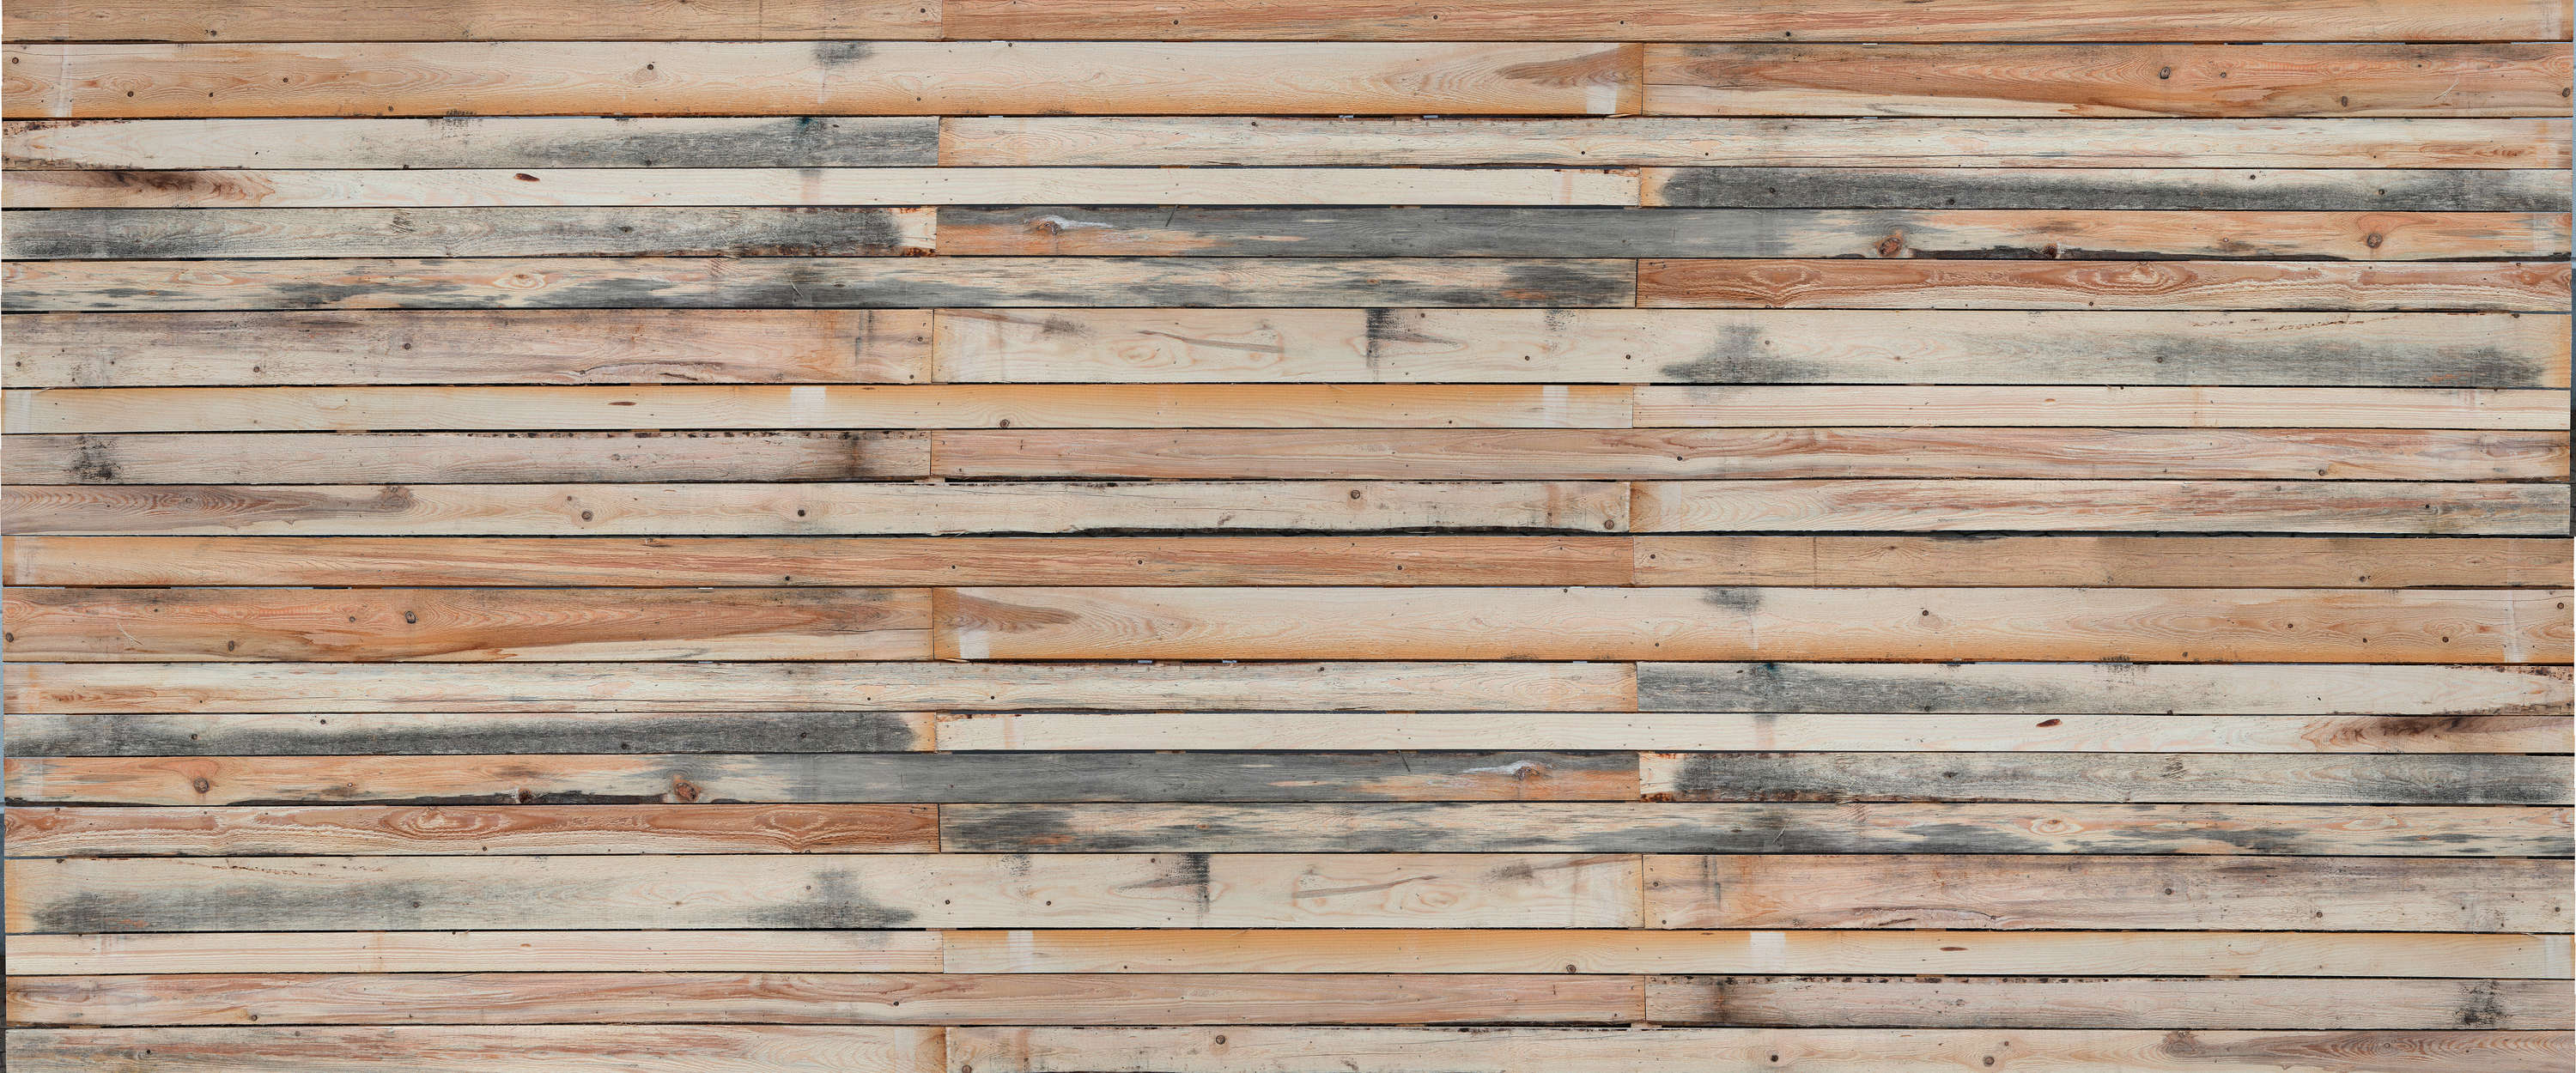             Weathered planks - photo wallpaper in used look as a highlight for the wall
        